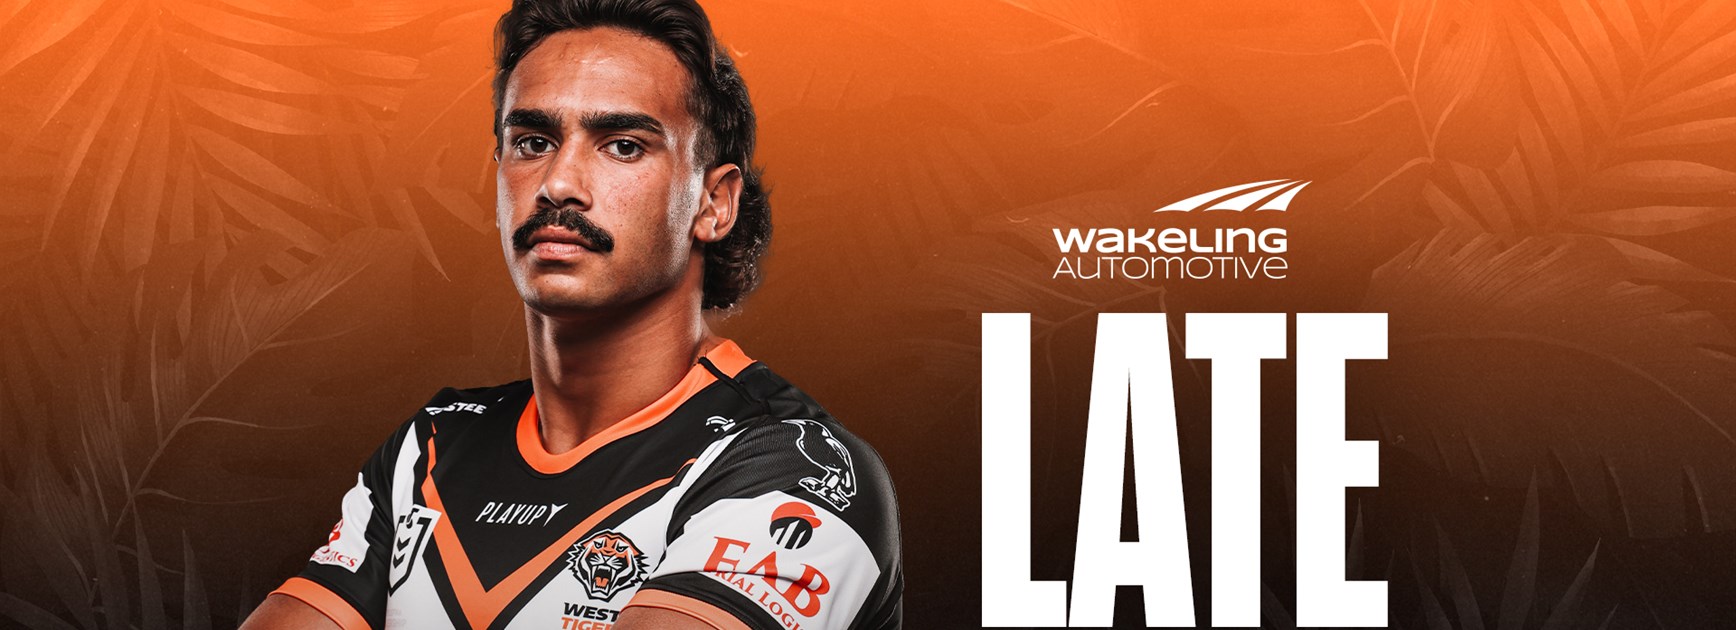 Late Changes: NRL Round 24 vs Warriors